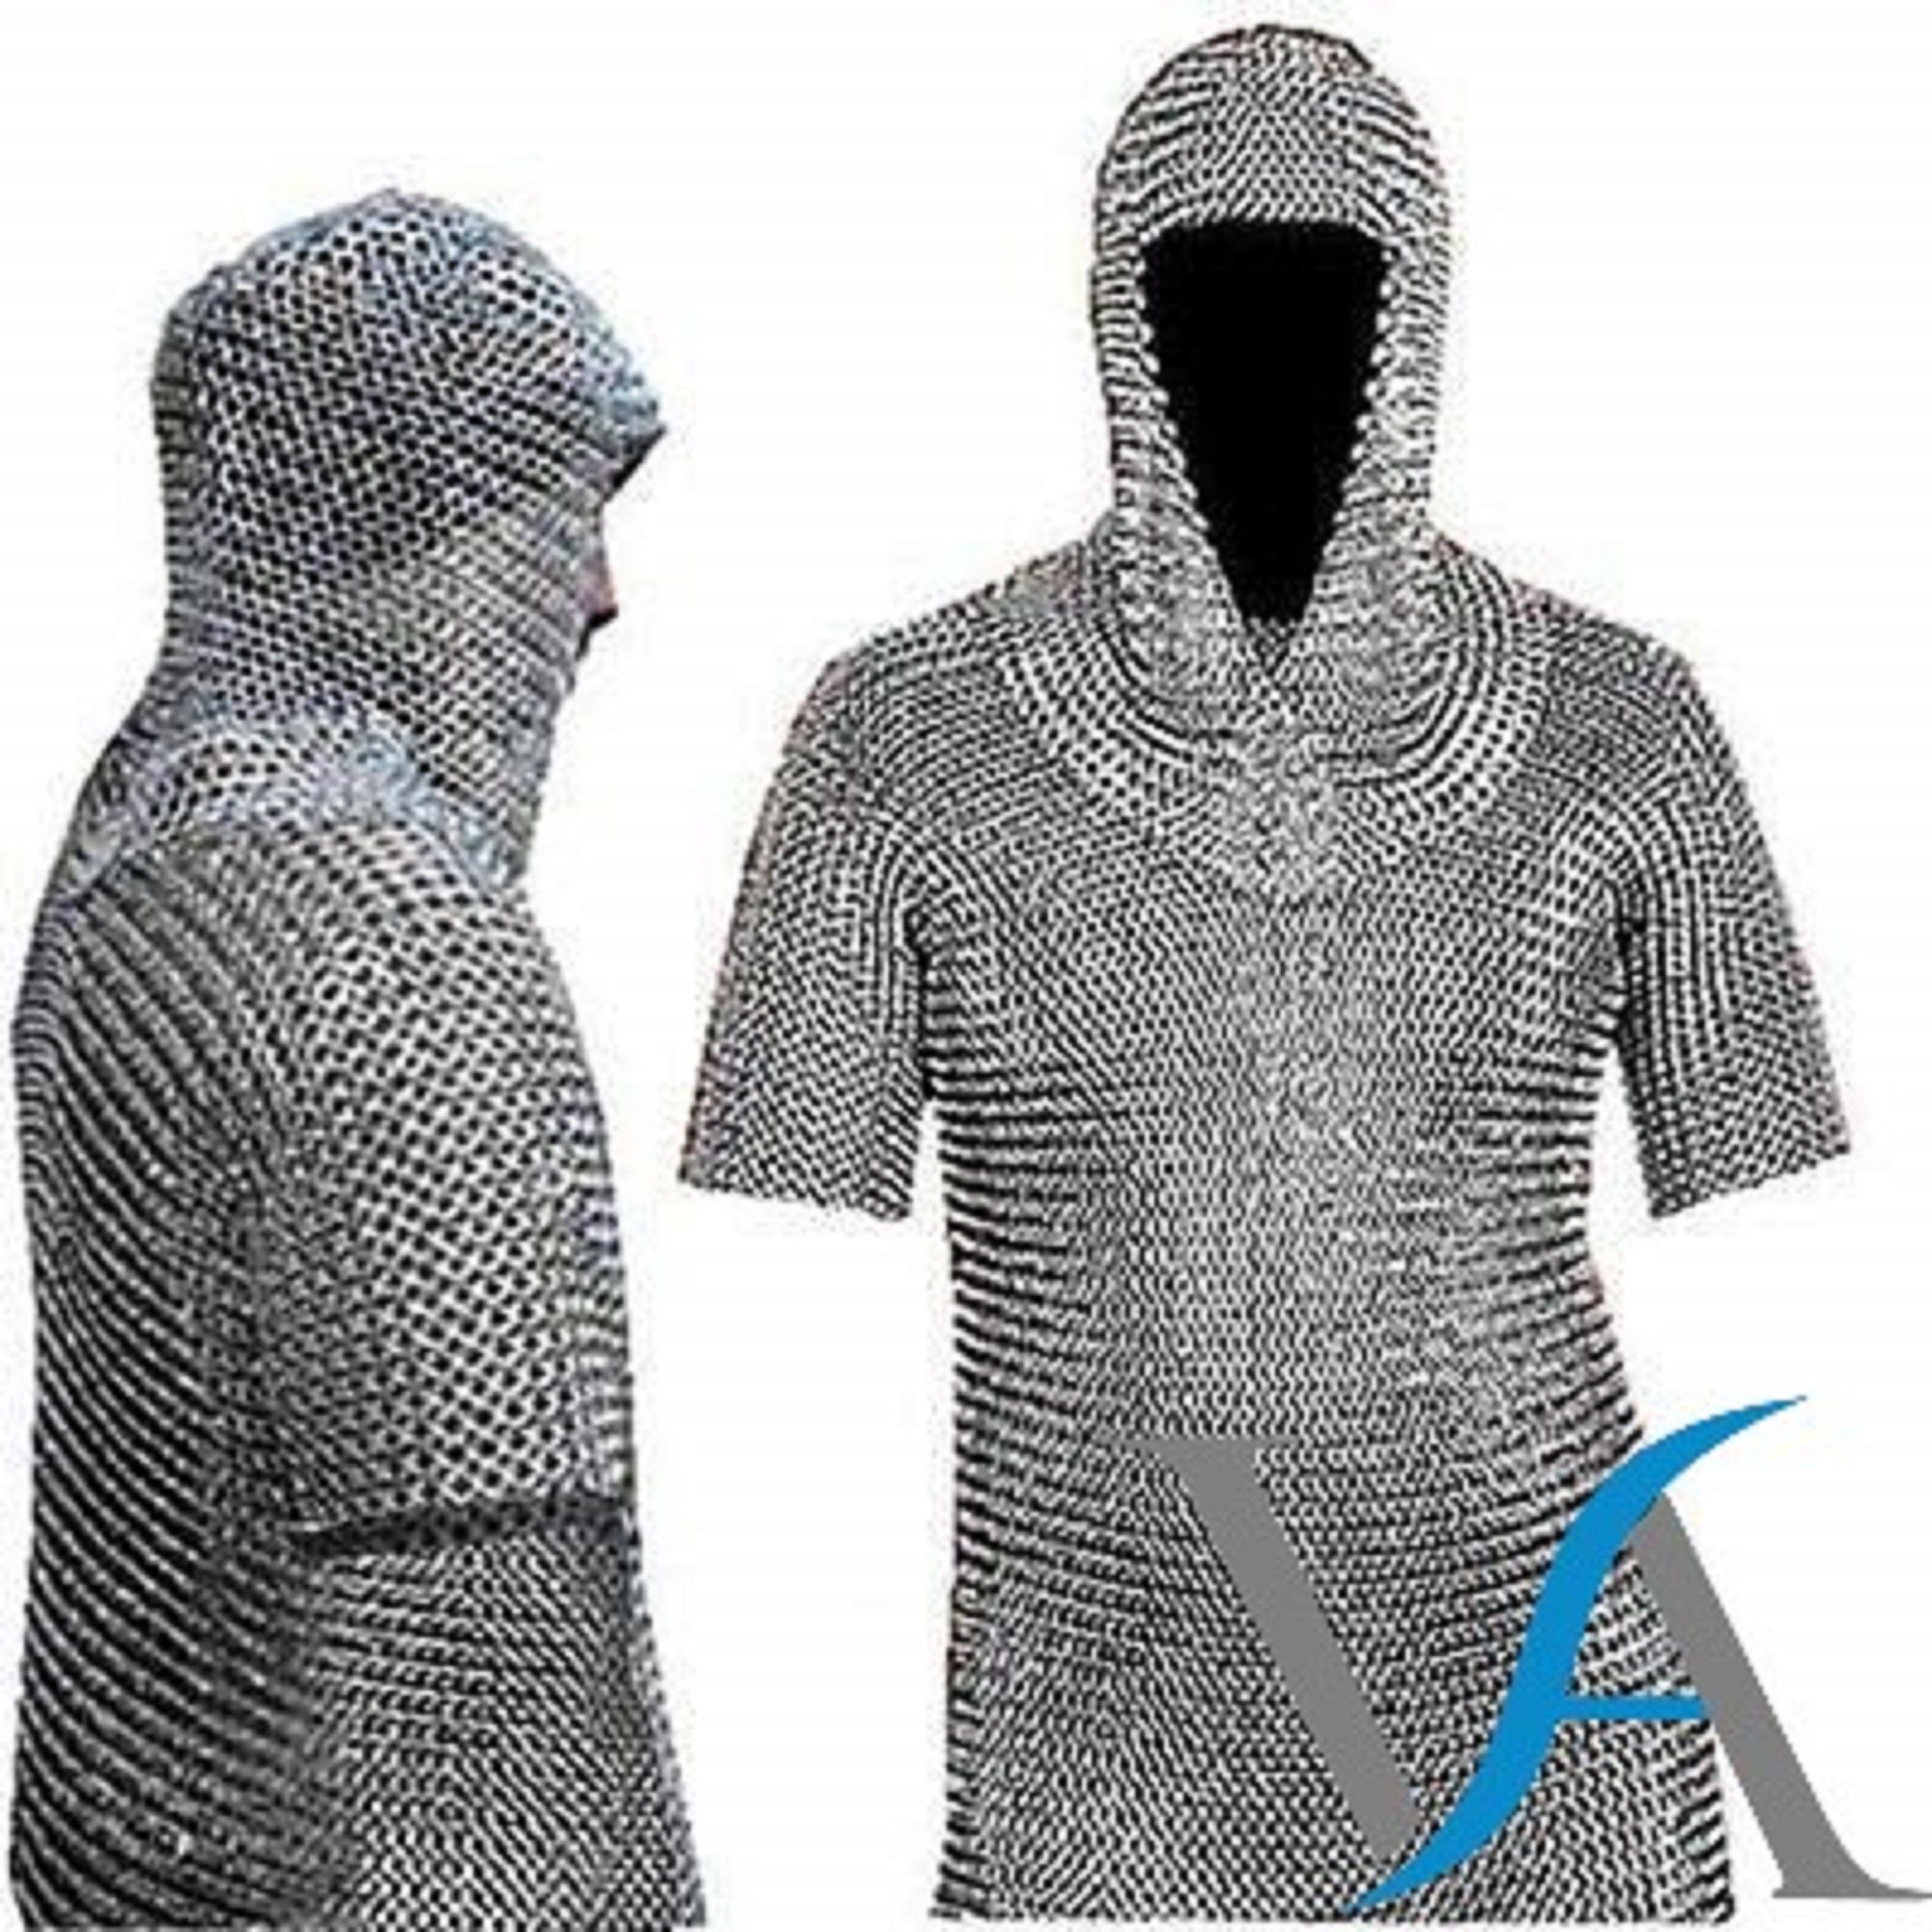 Aluminium Chainmail Shirt Butted Aluminum Chain Mail | Etsy